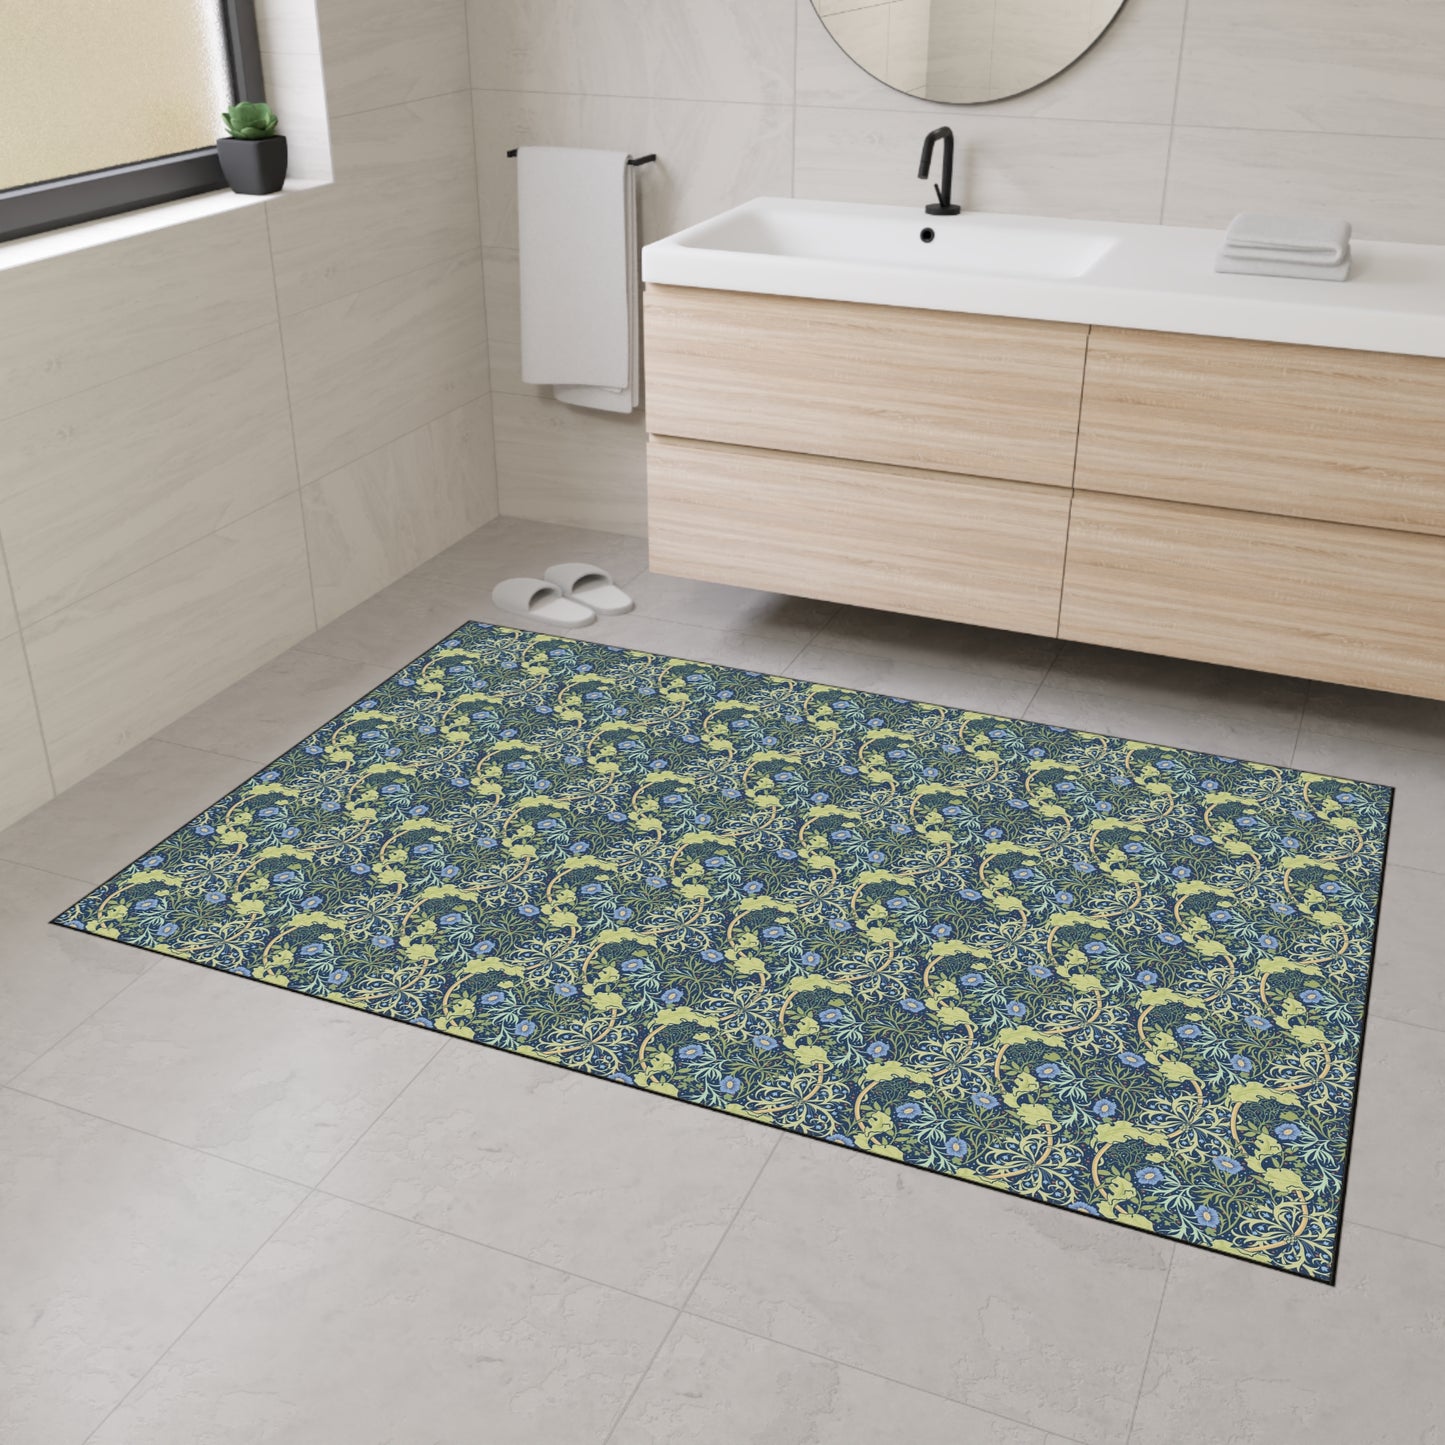 william-morris-co-heavy-duty-floor-mat-seaweed-collection-blue-flowers-8